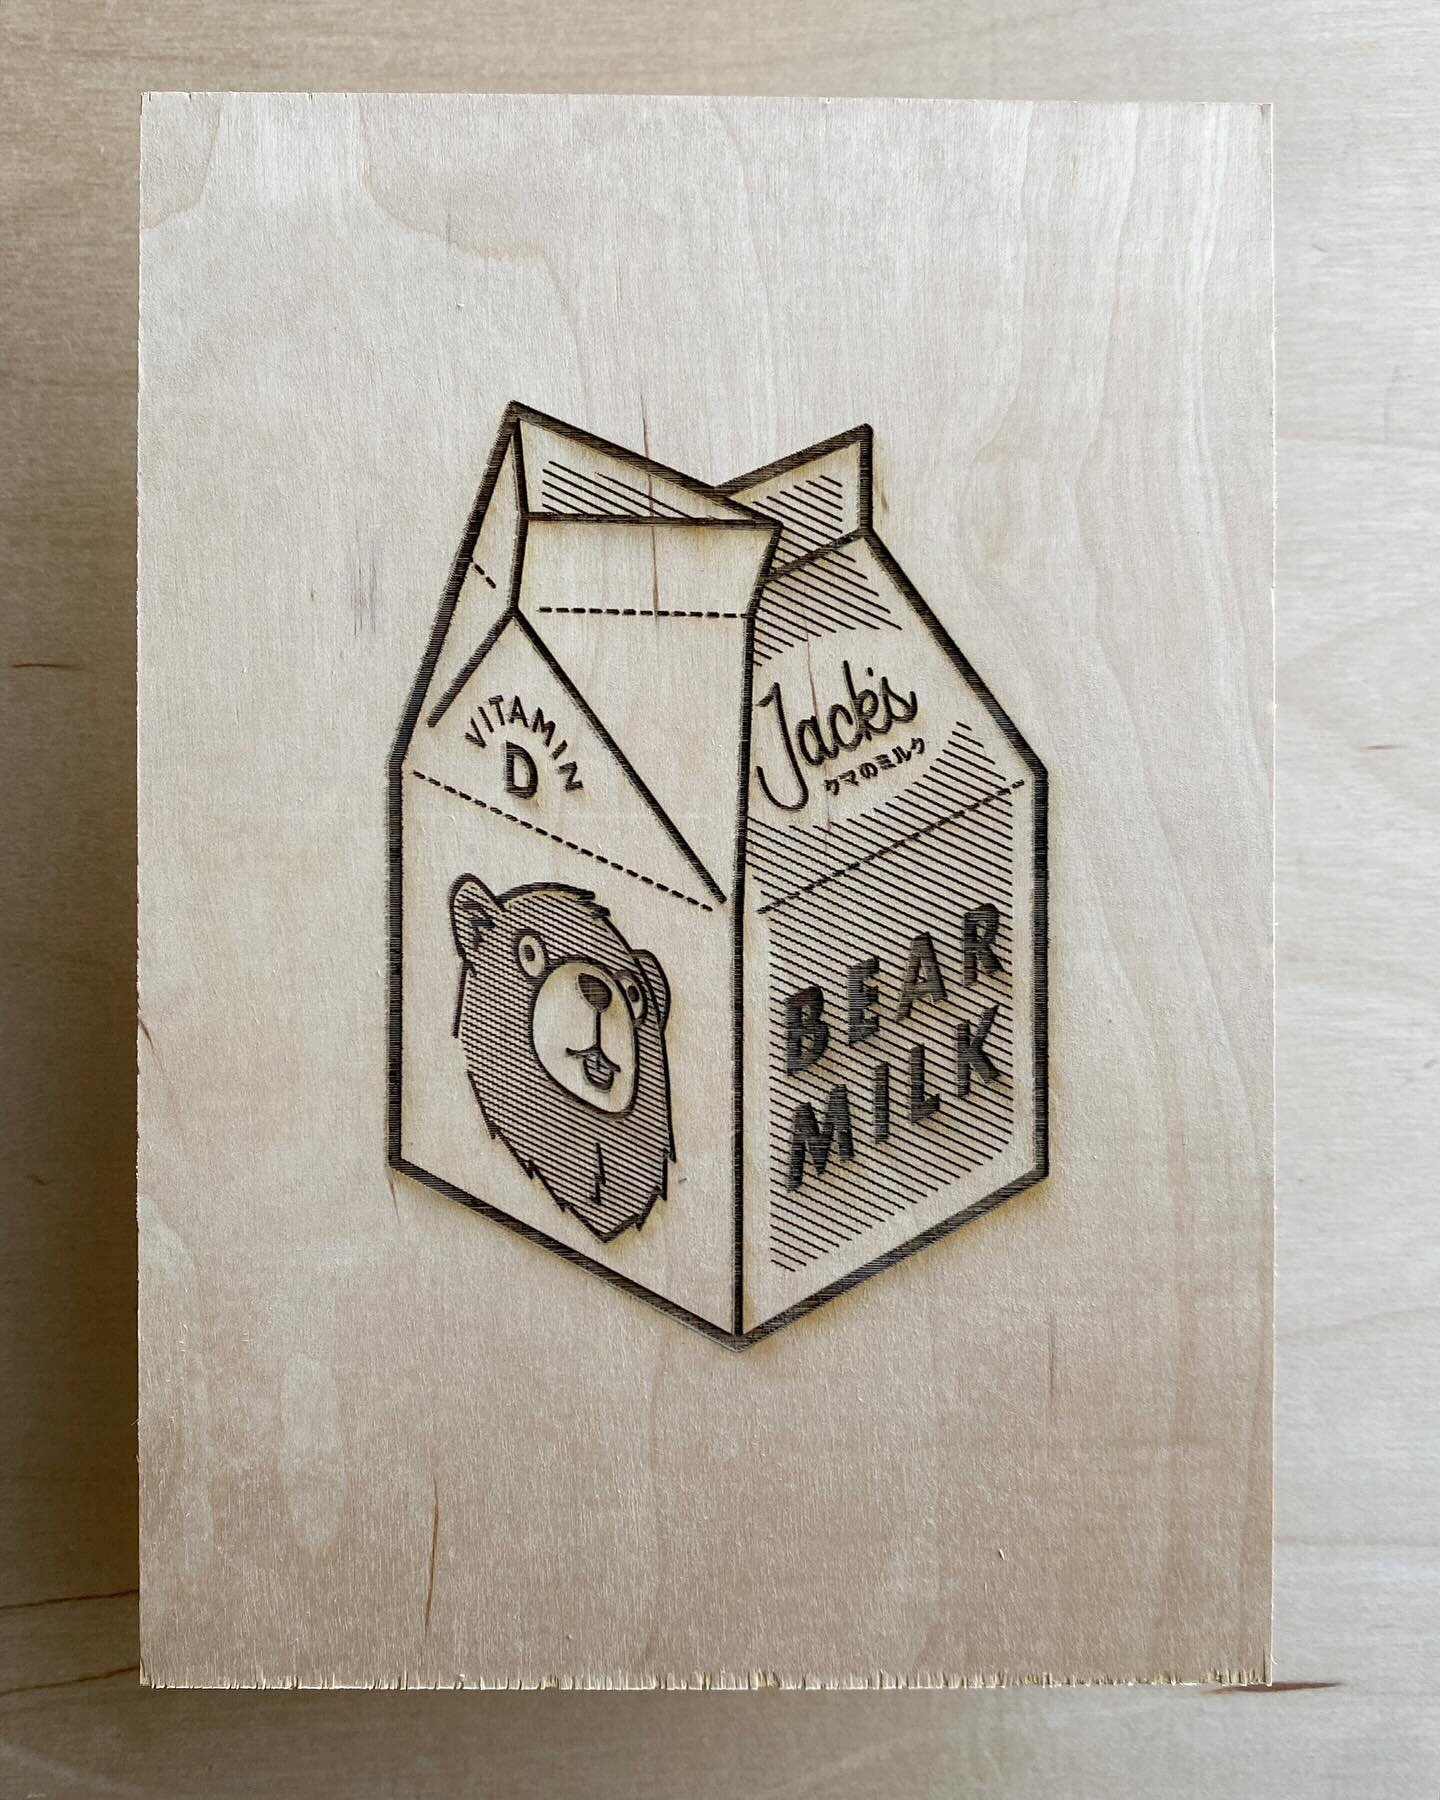 anyone else like bear milk?

made a few of these - check the shop!